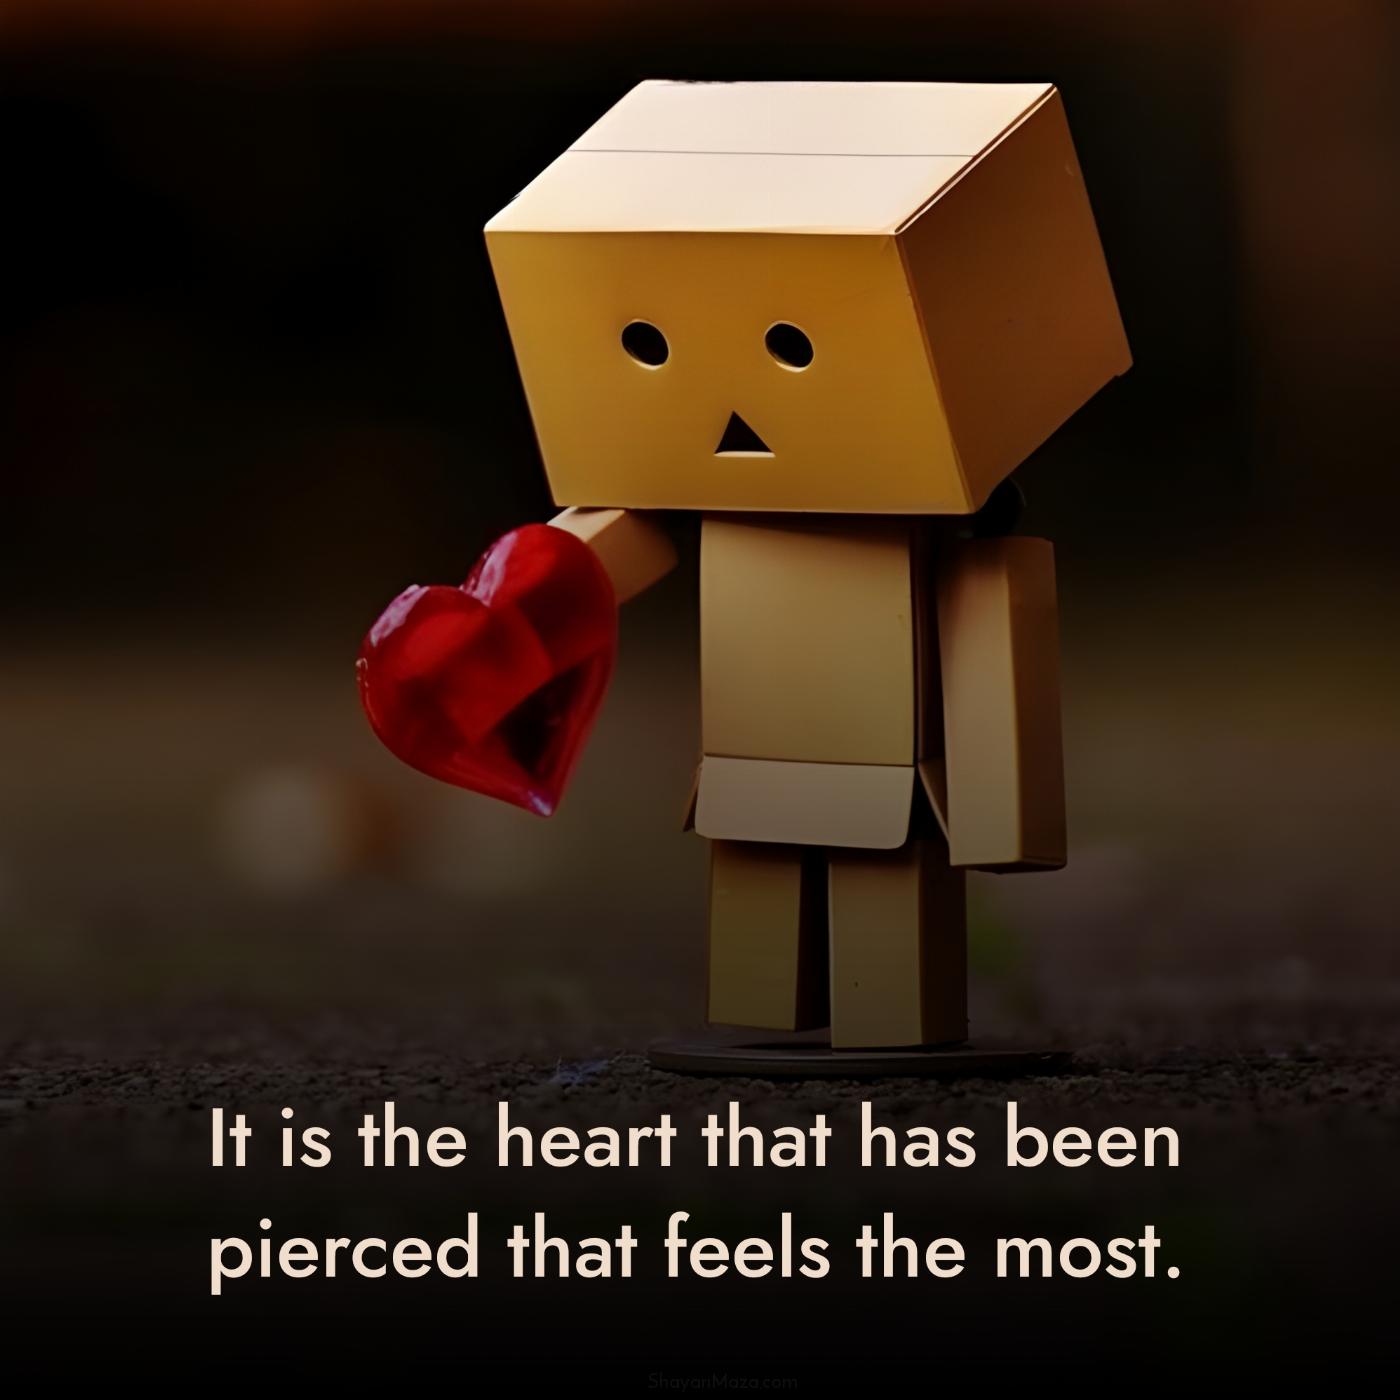 It is the heart that has been pierced that feels the most